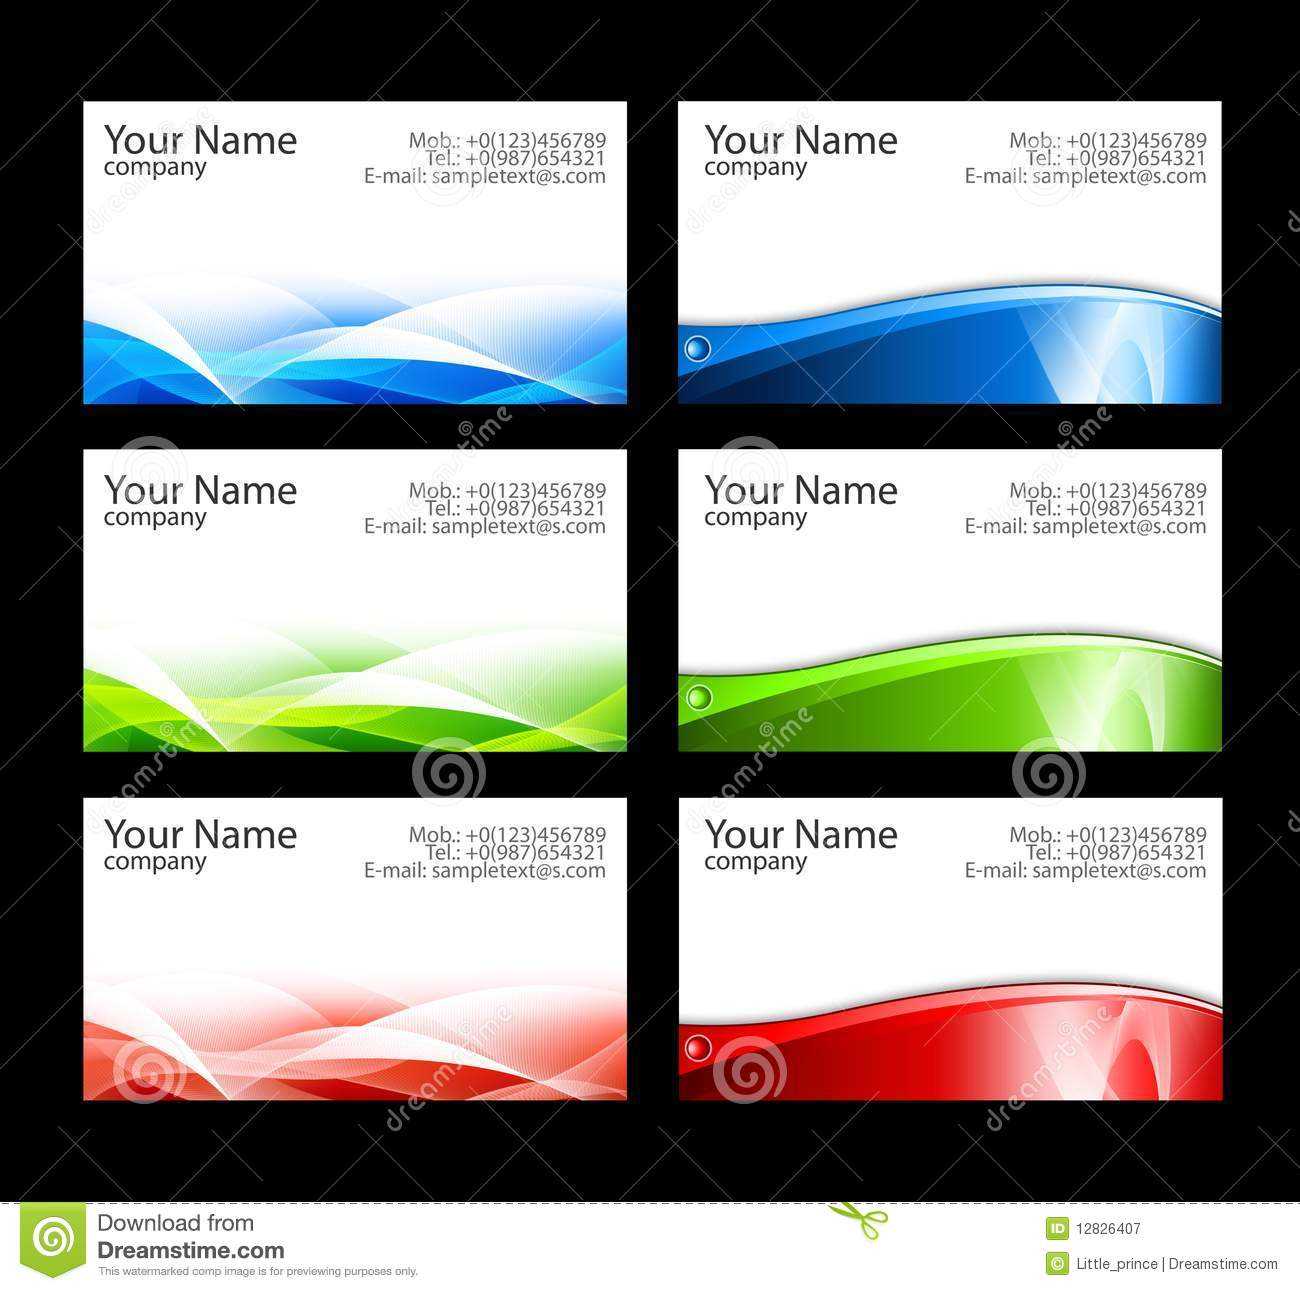 Business Cards Templates Stock Illustration. Illustration Of For Free Complimentary Card Templates